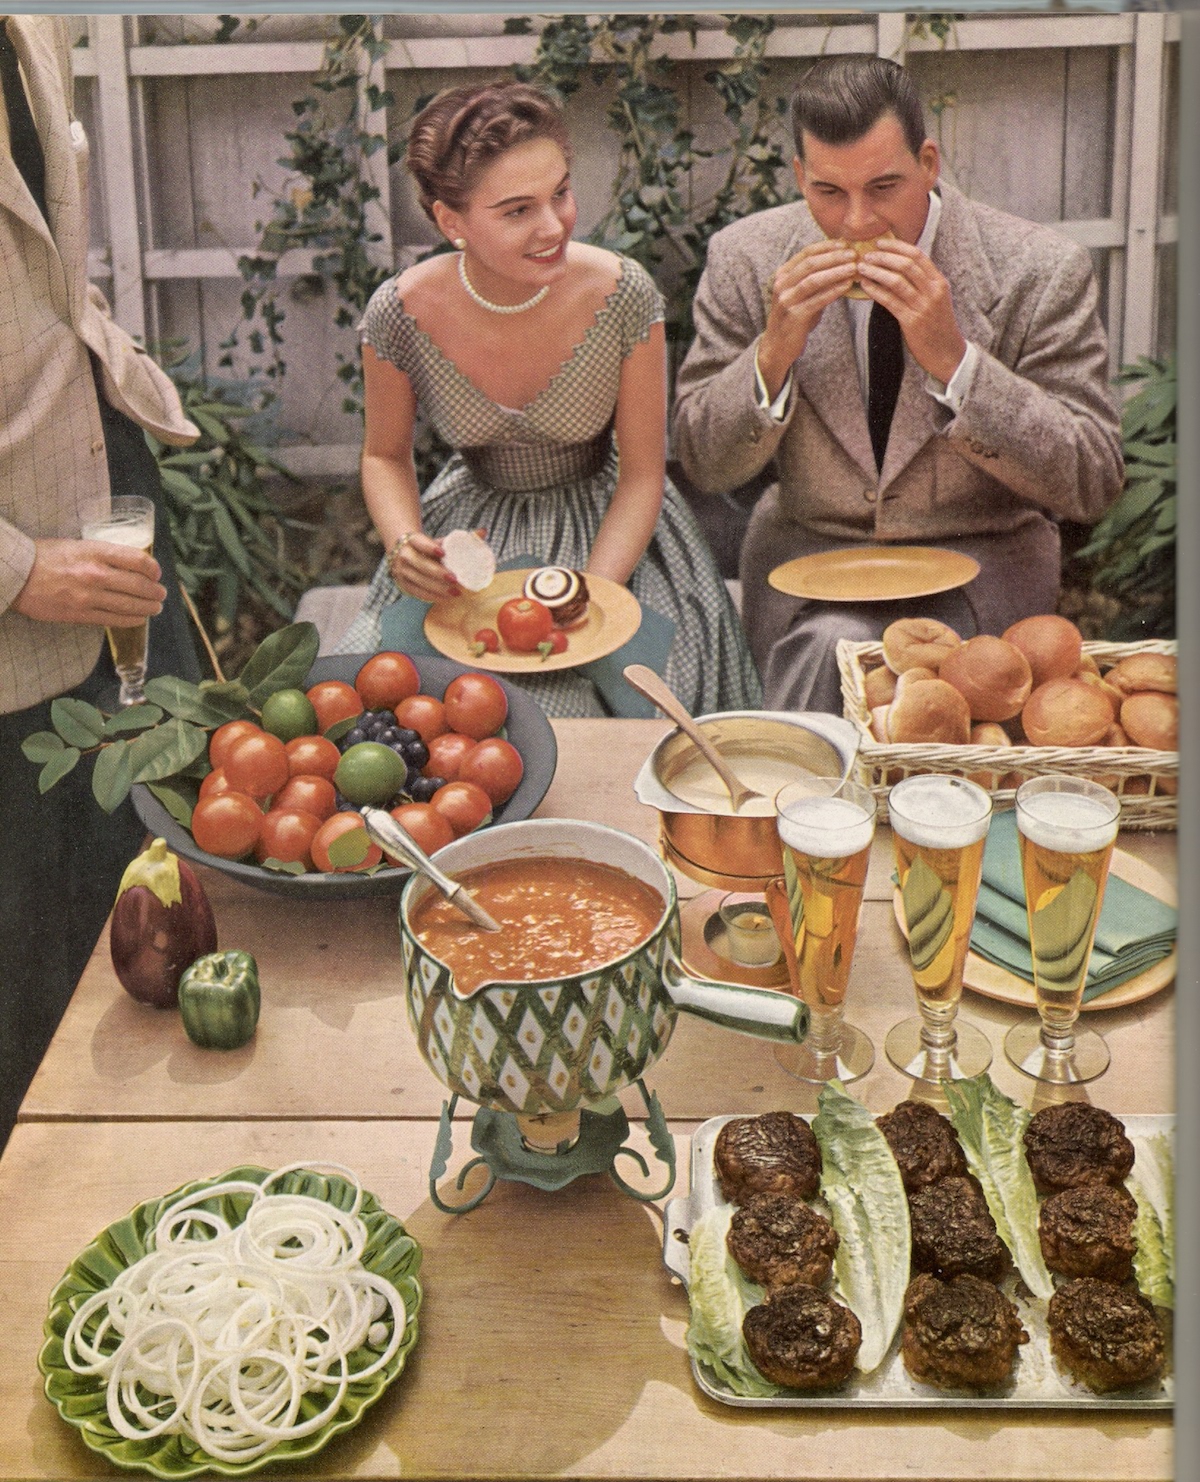 The Life Picture Cookbook 1958